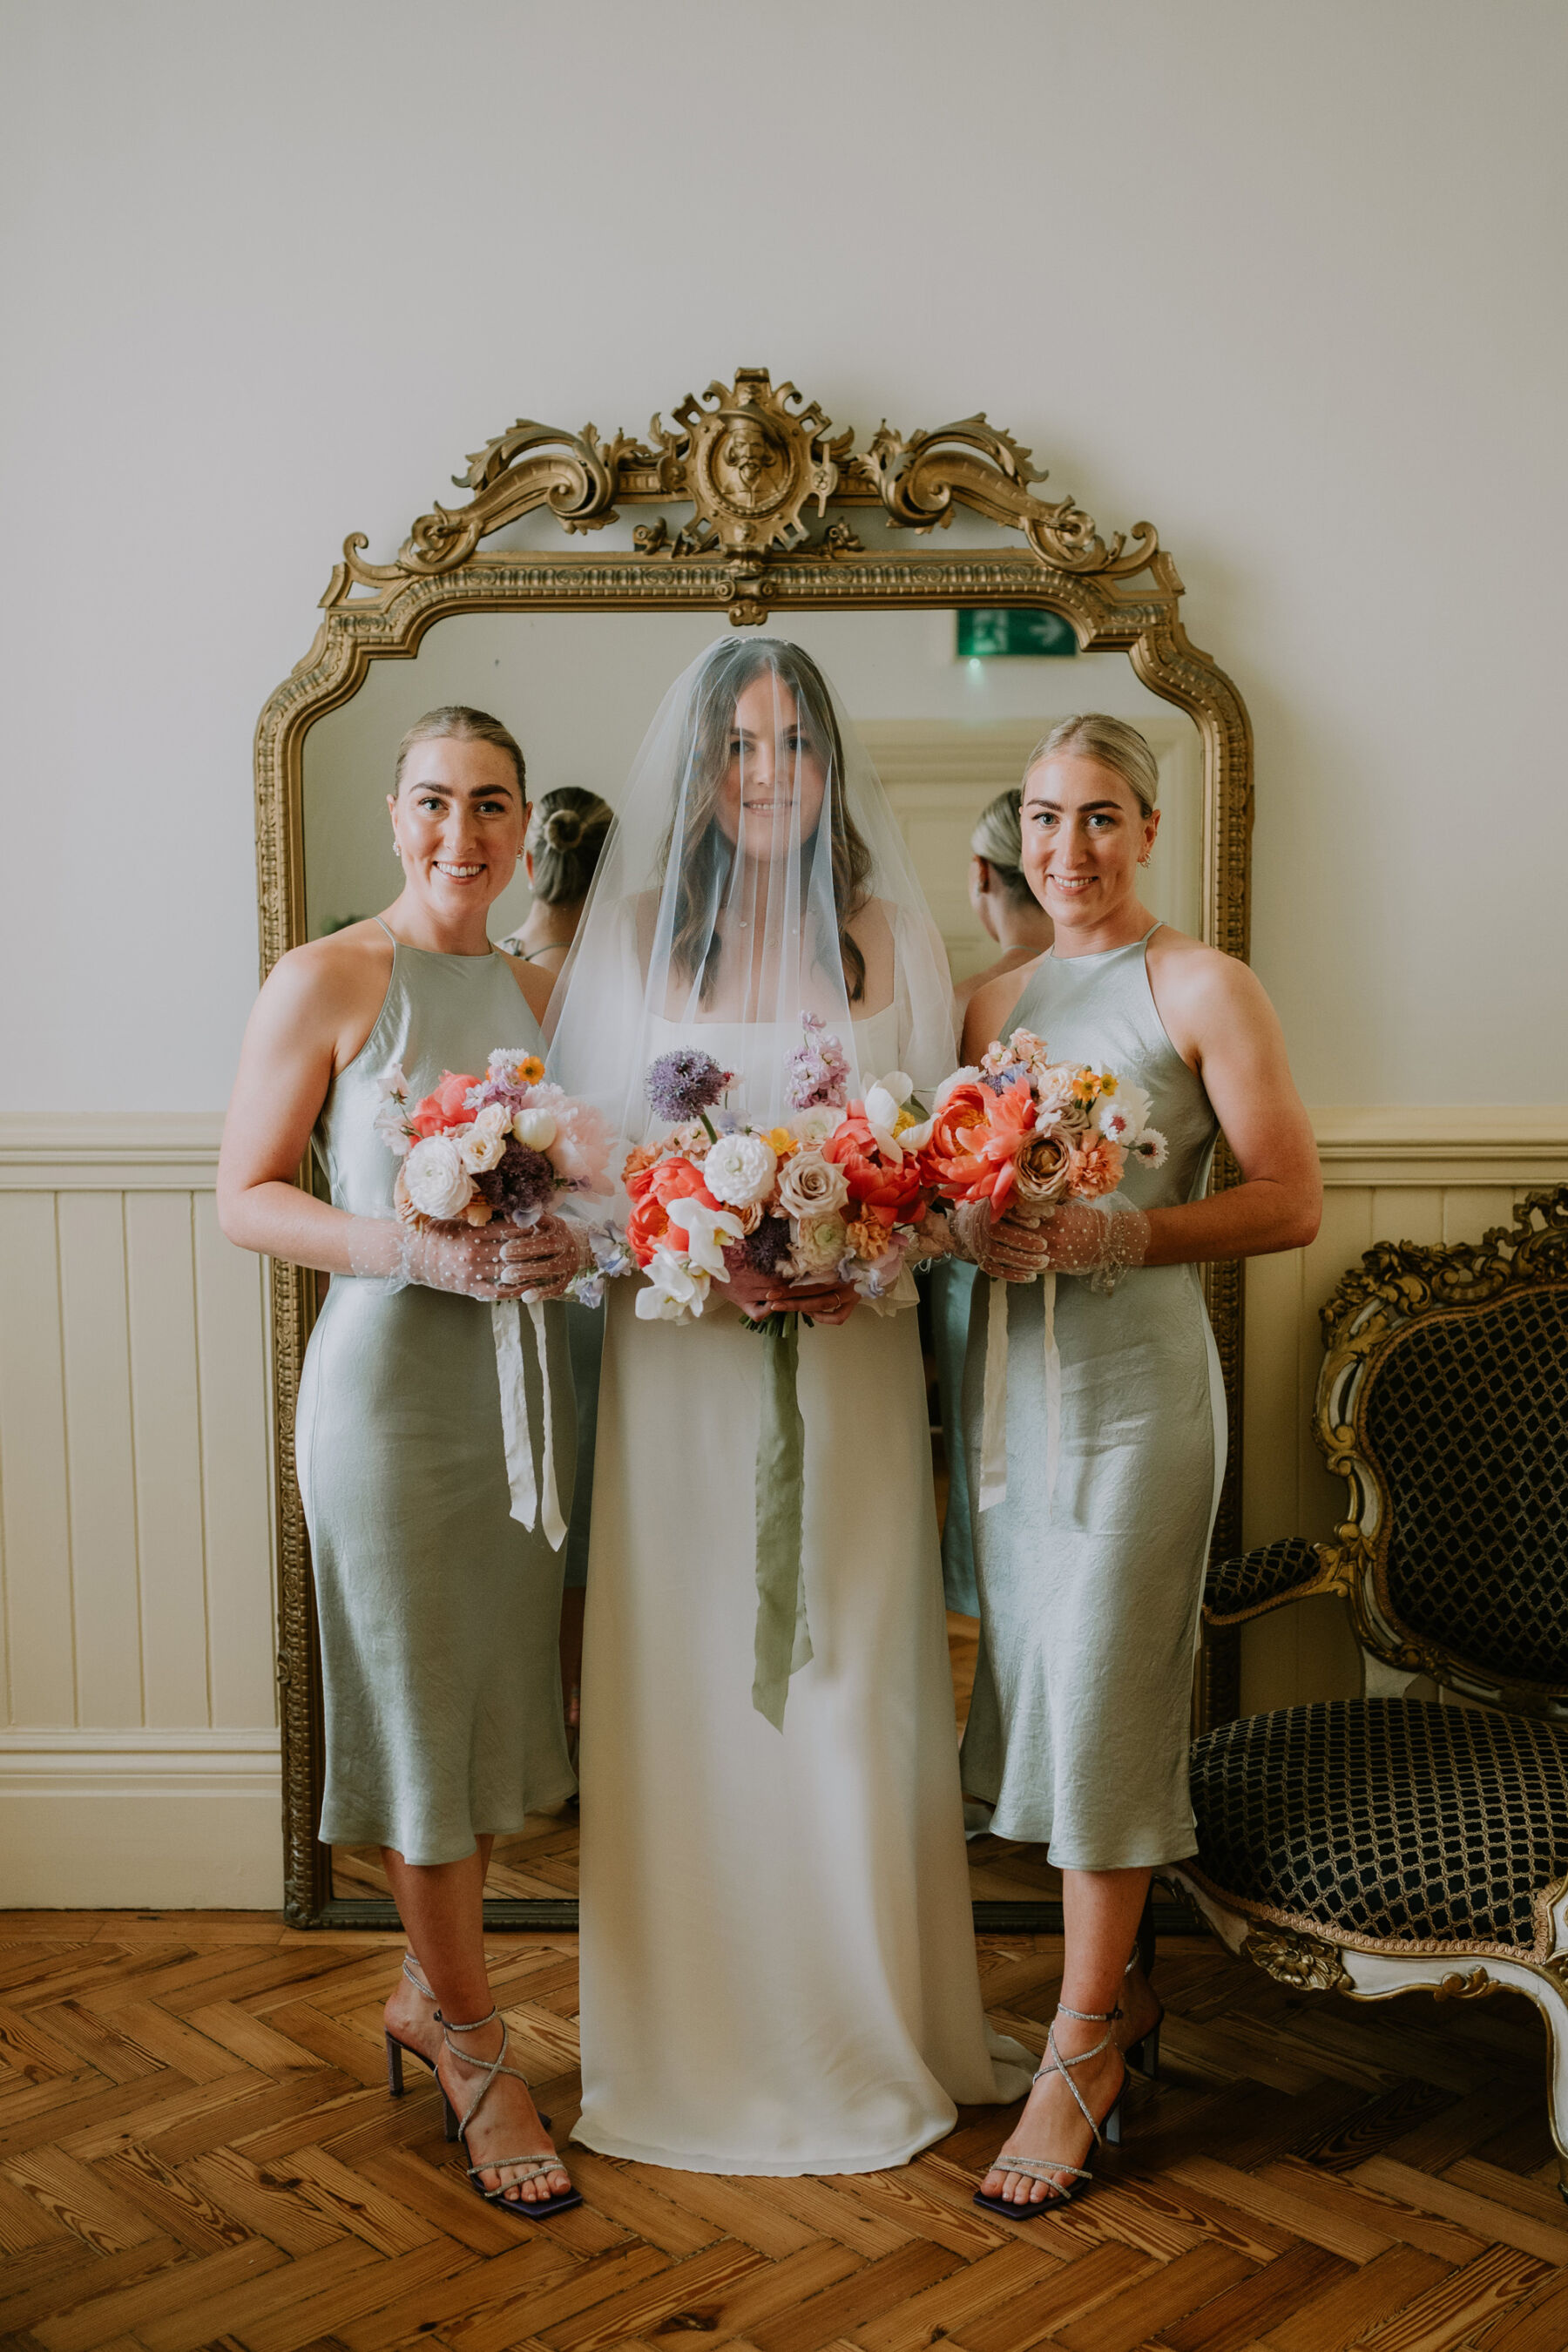 Bridesmaids in calf length pale green halterneck slip dresses and carrying colourful bouquets. Bride wears a Reformation dress and single tier veil over her face.